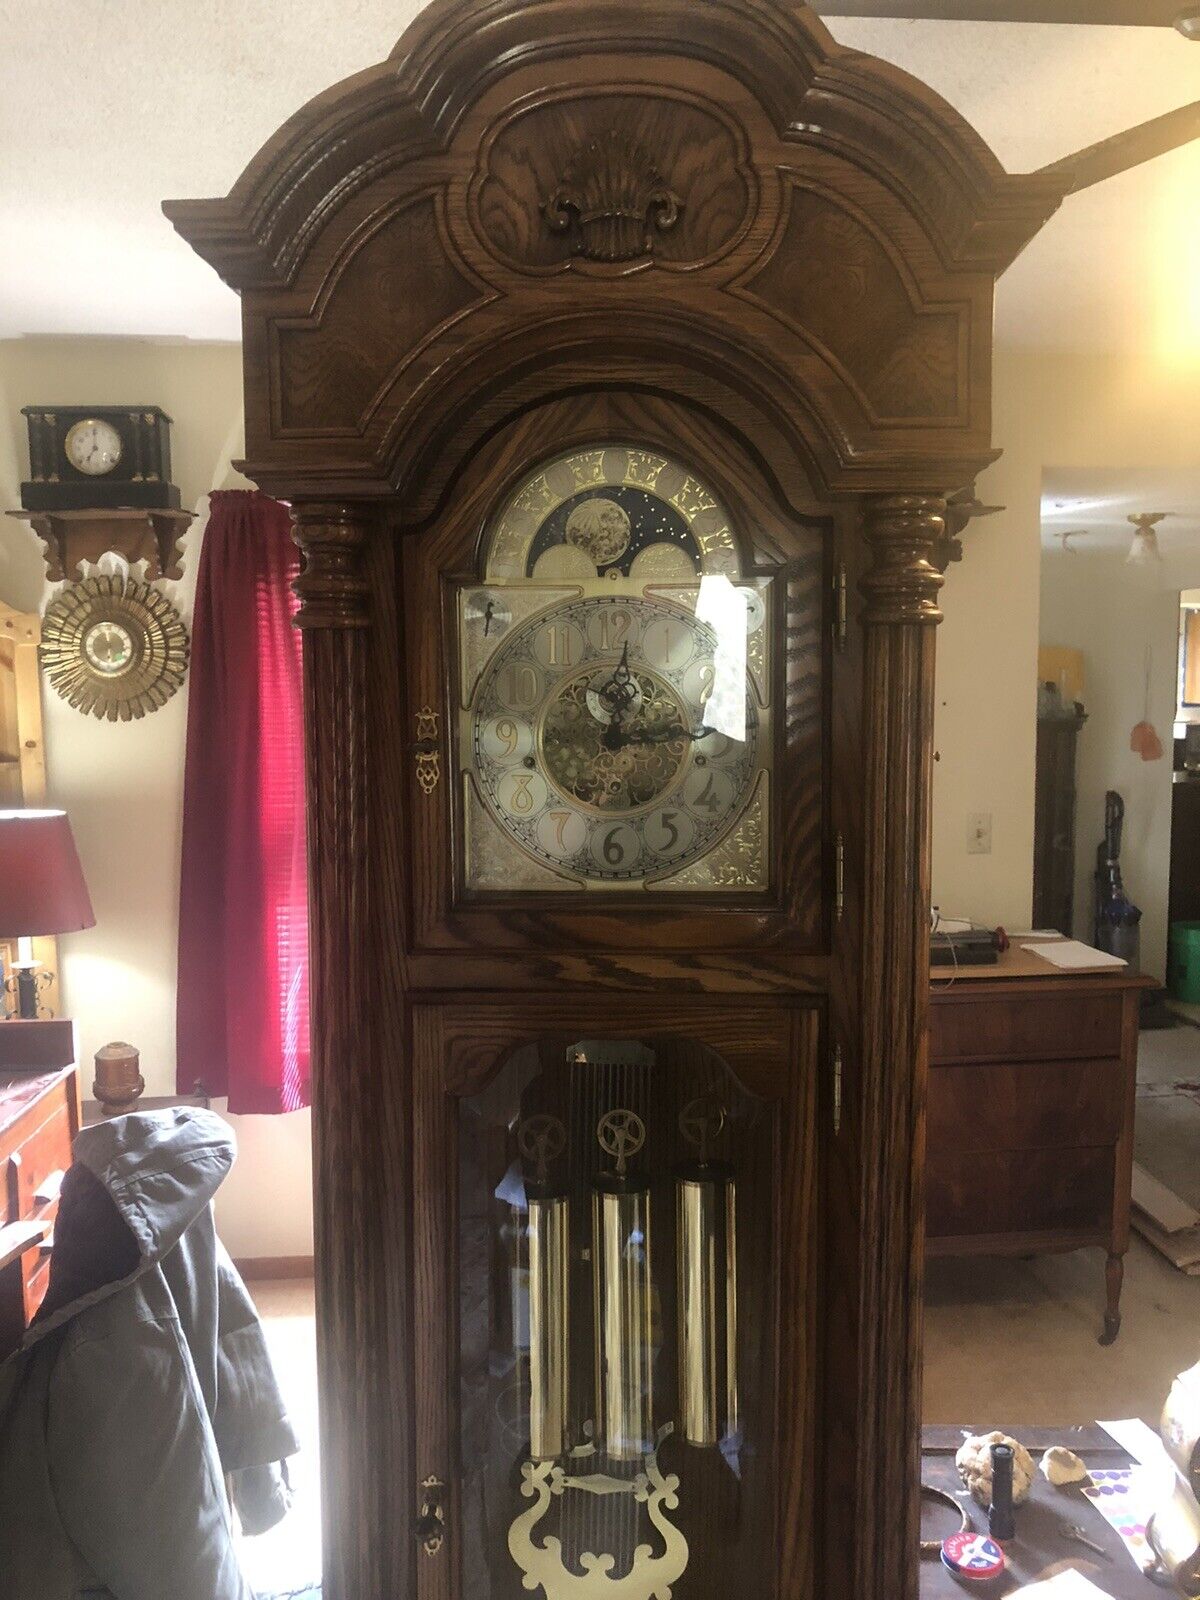 Sligh Grandfather Clock / Free Delivery & Setup Within 115  Miles Of 49090